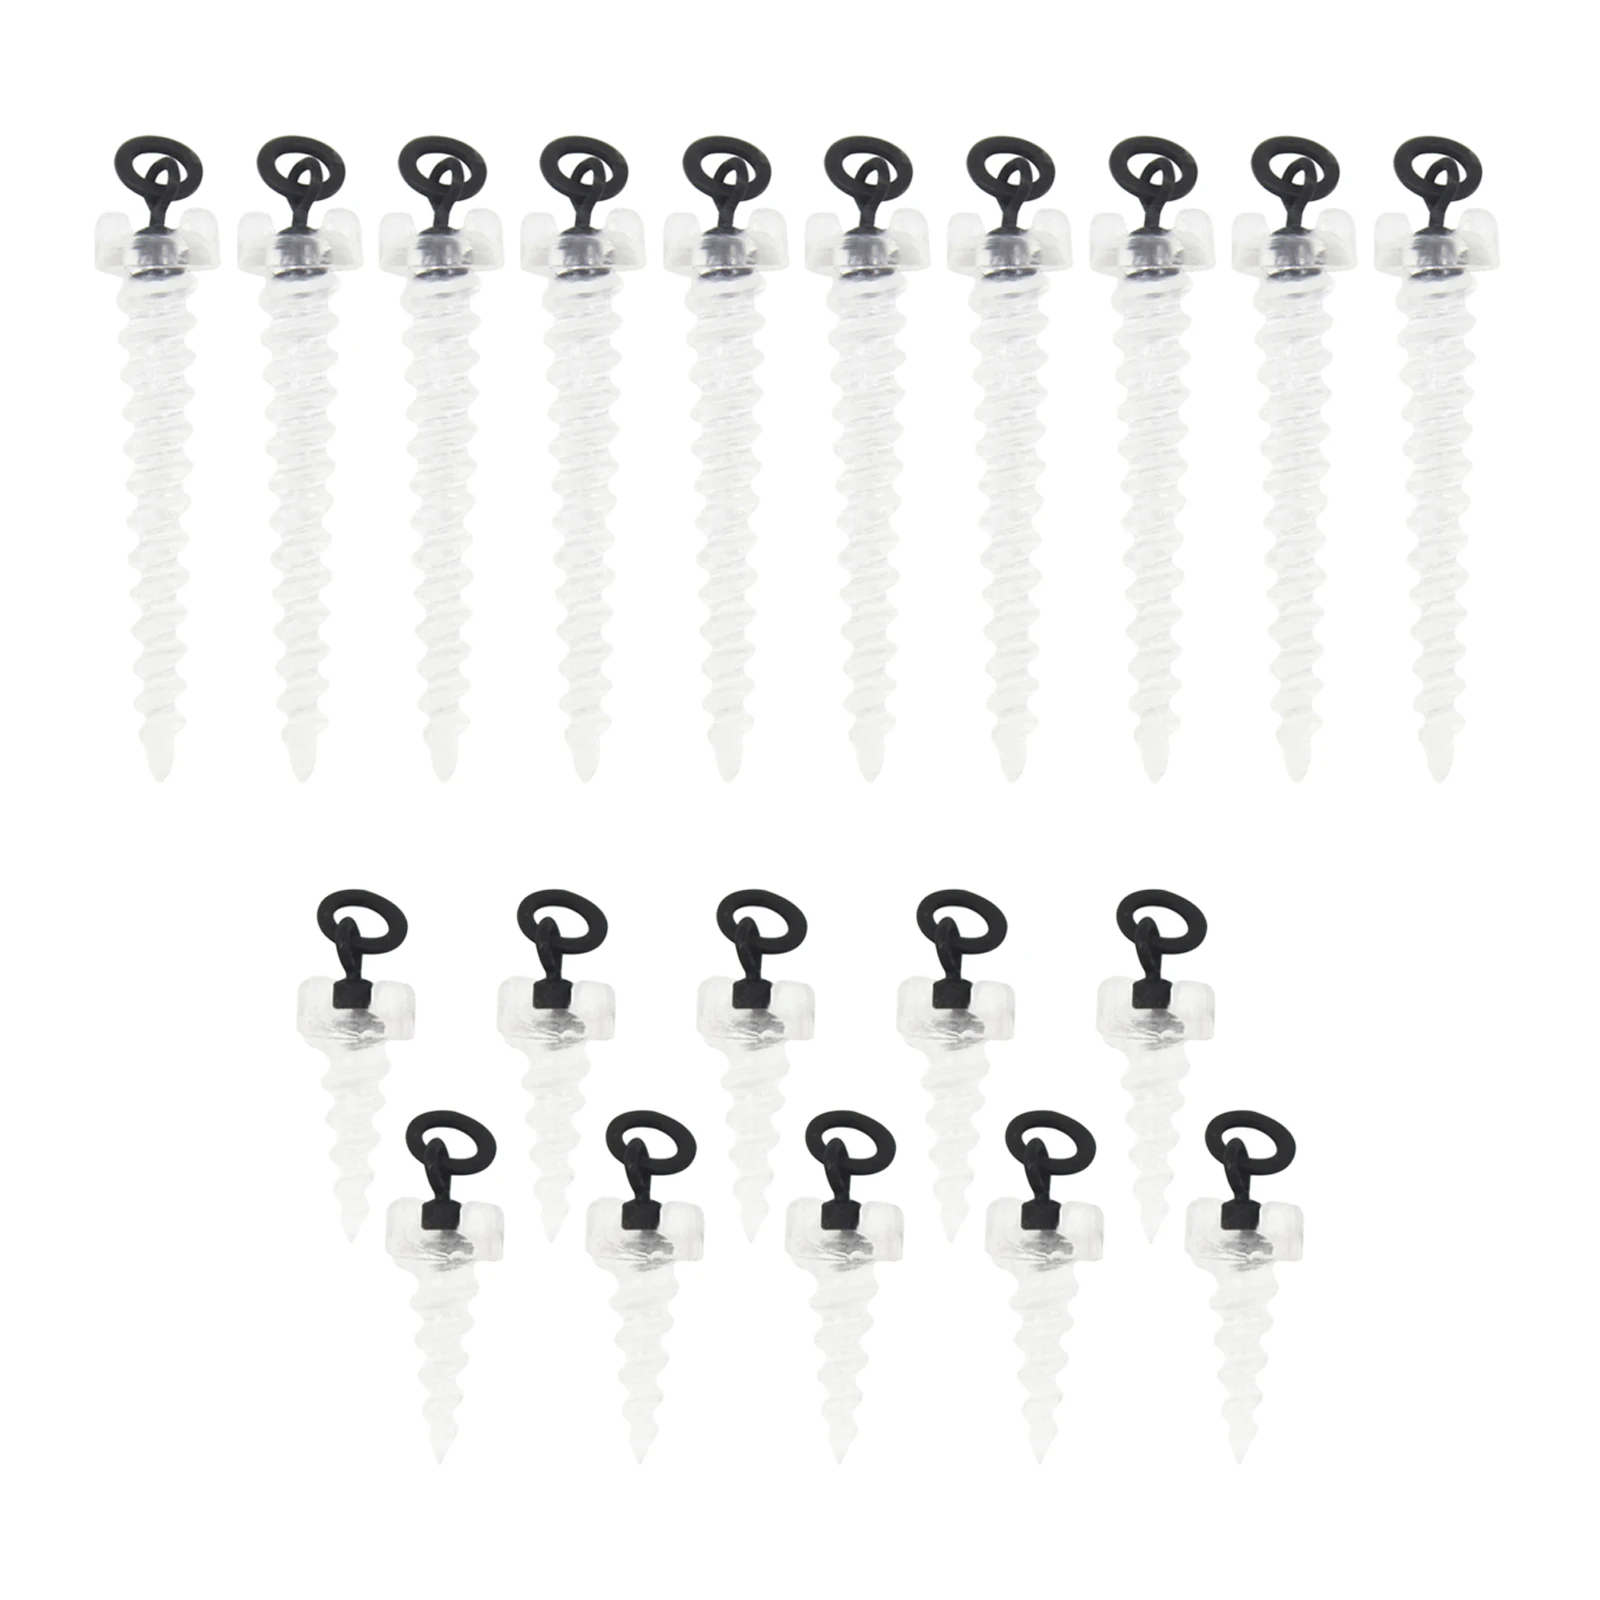 10Pcs 15mm Bait Screw Swivel with Ring Swivel Terminal Tackle Lure Pegs Rig Surface Bait 360  Clear for Carp Fishing Pellets